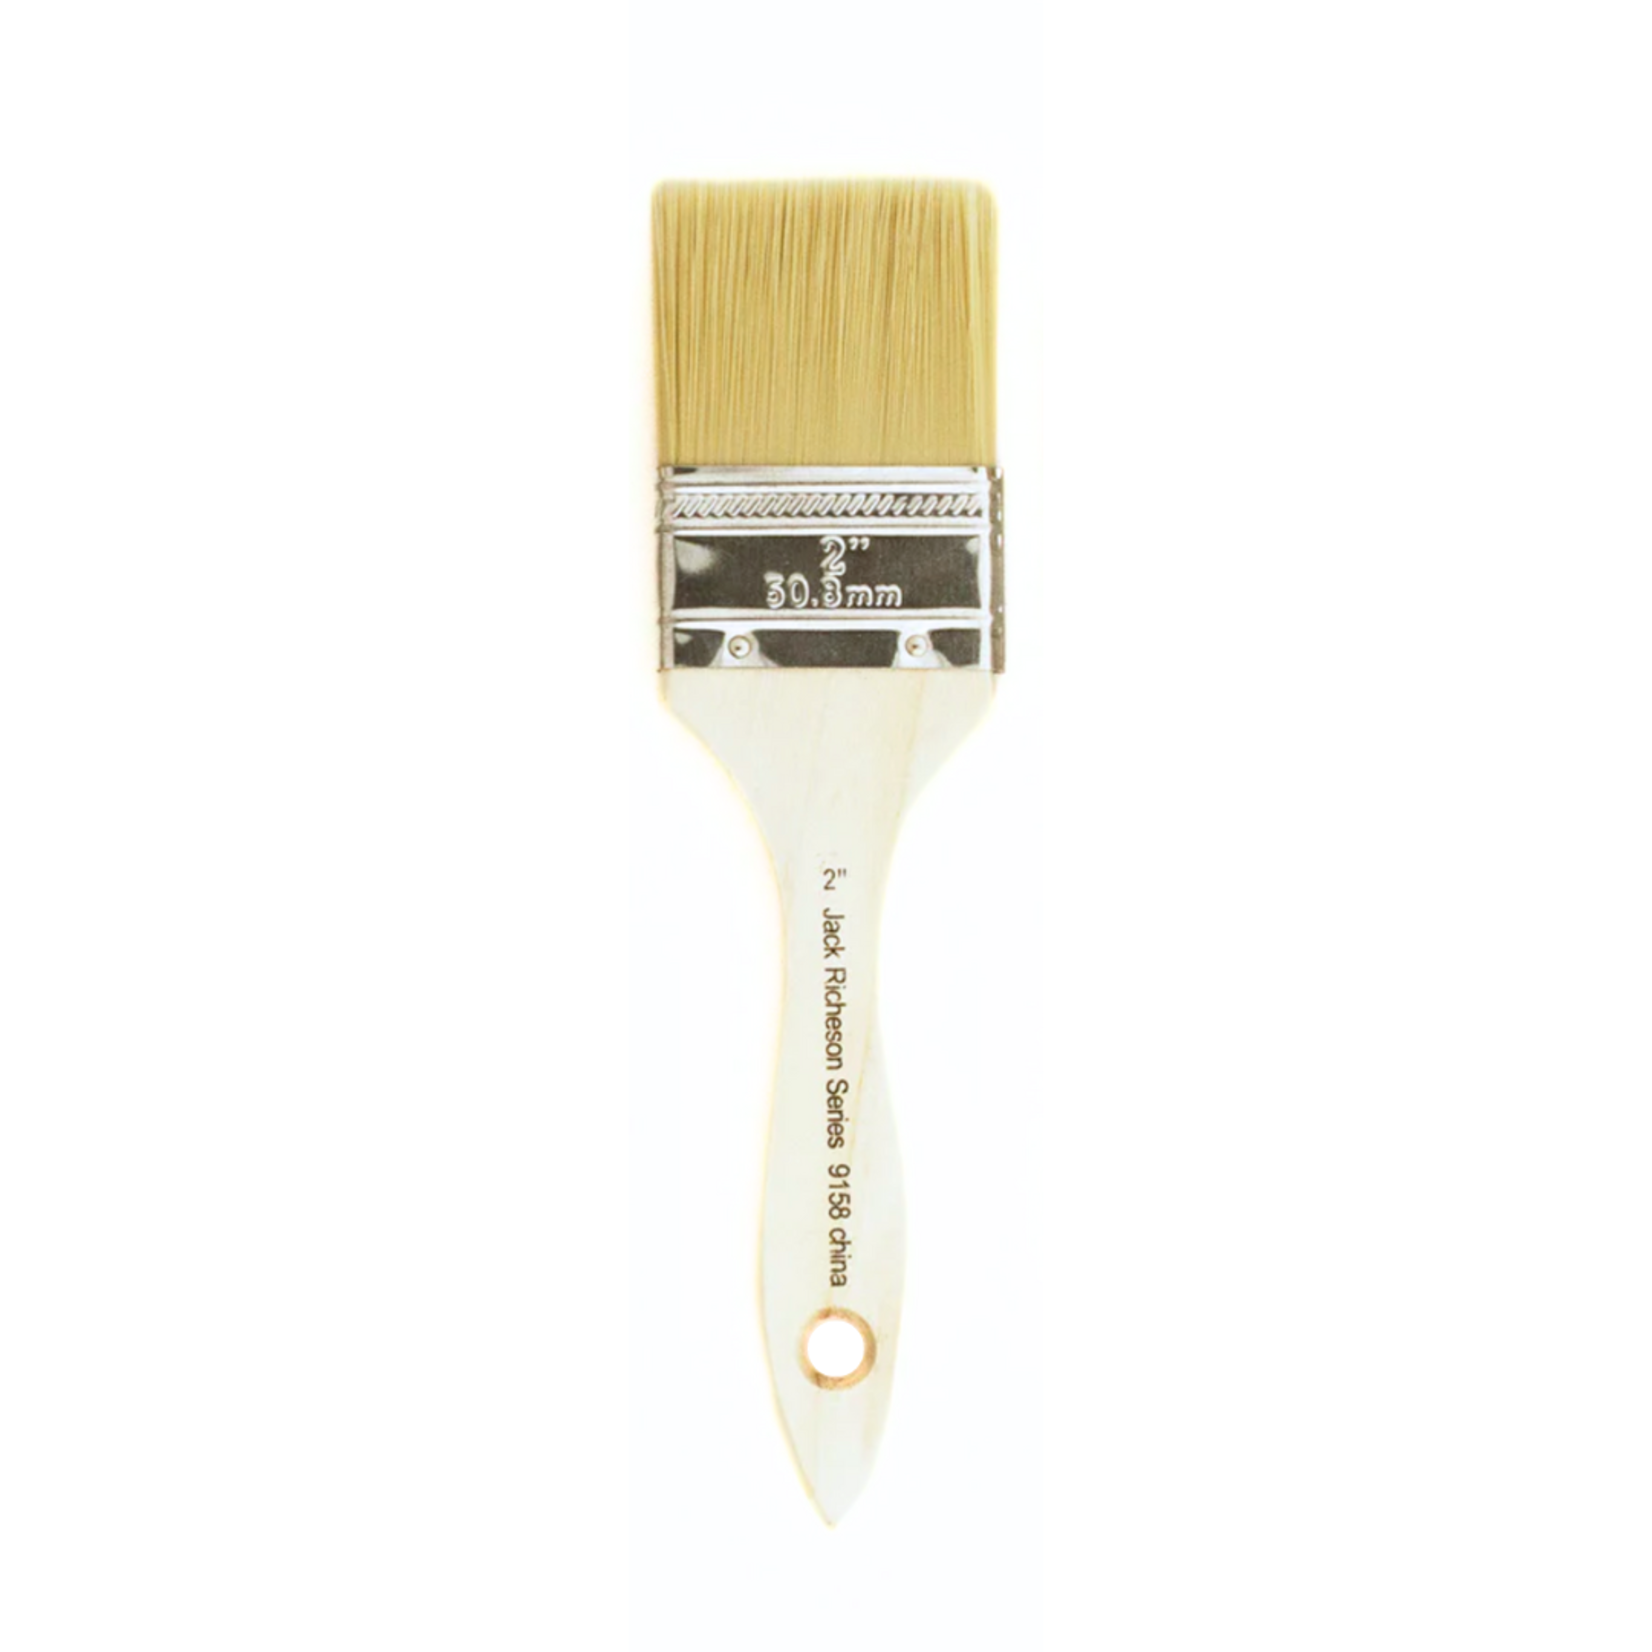 JACK RICHESON JACK RICHESON SYNTHETIC GESSO BRUSH SERIES 9158 2"